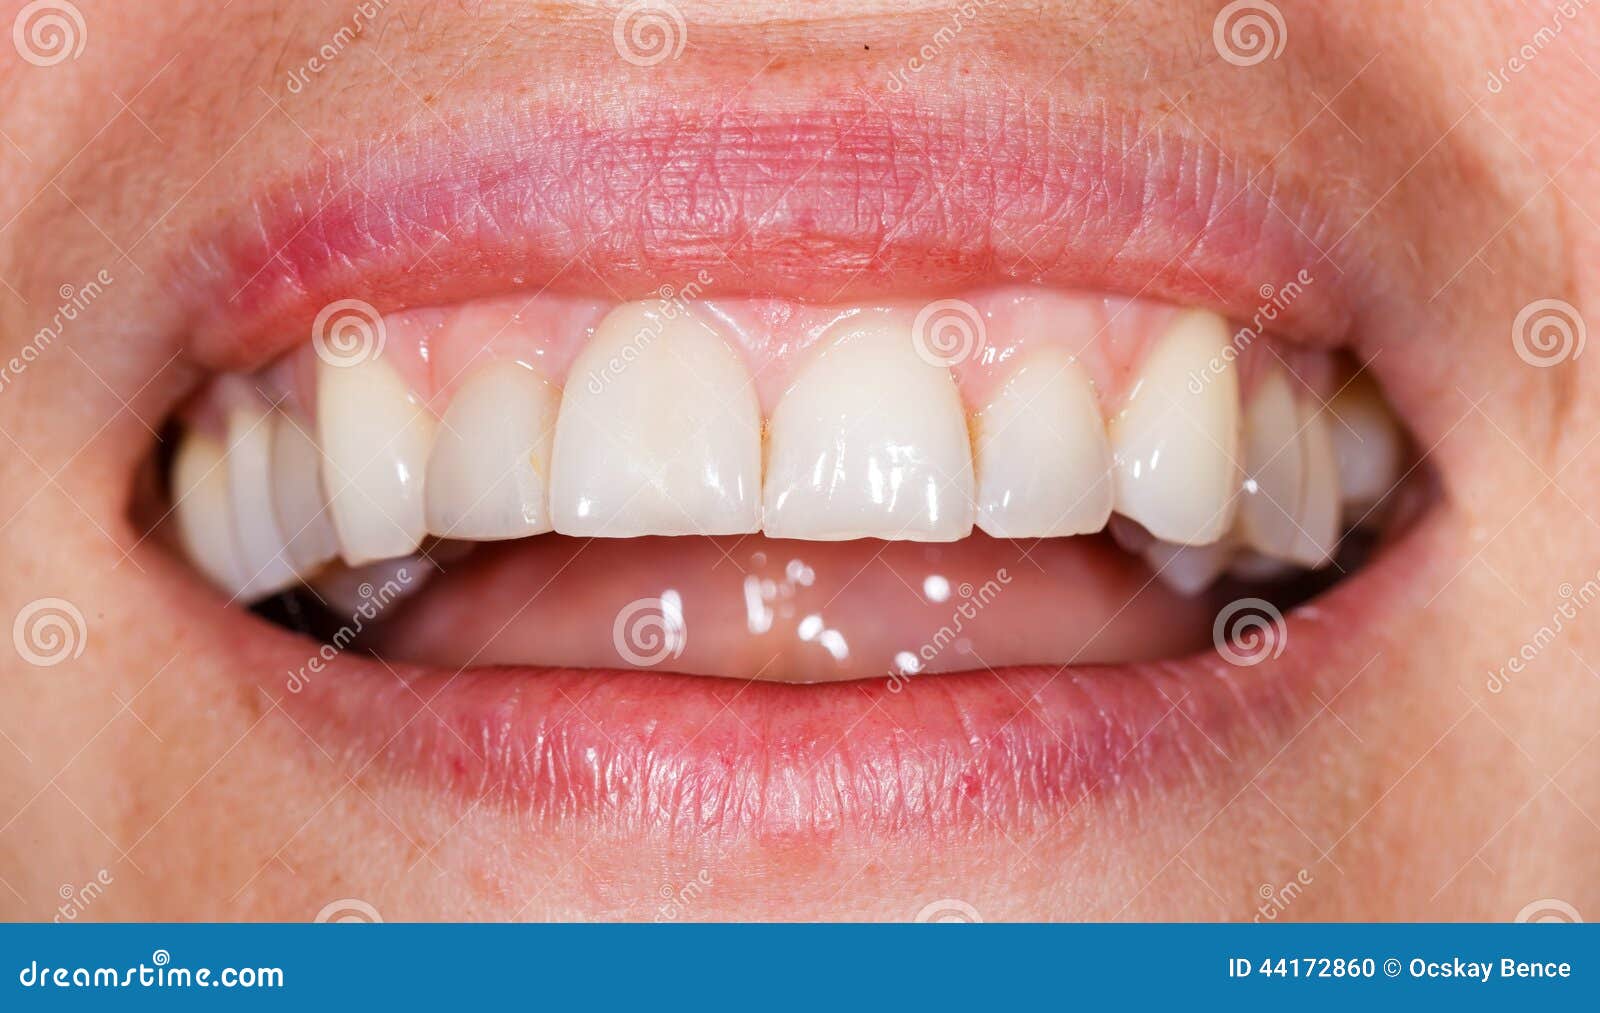 African Woman With White Teeth Smiling And Sticking Tongue 